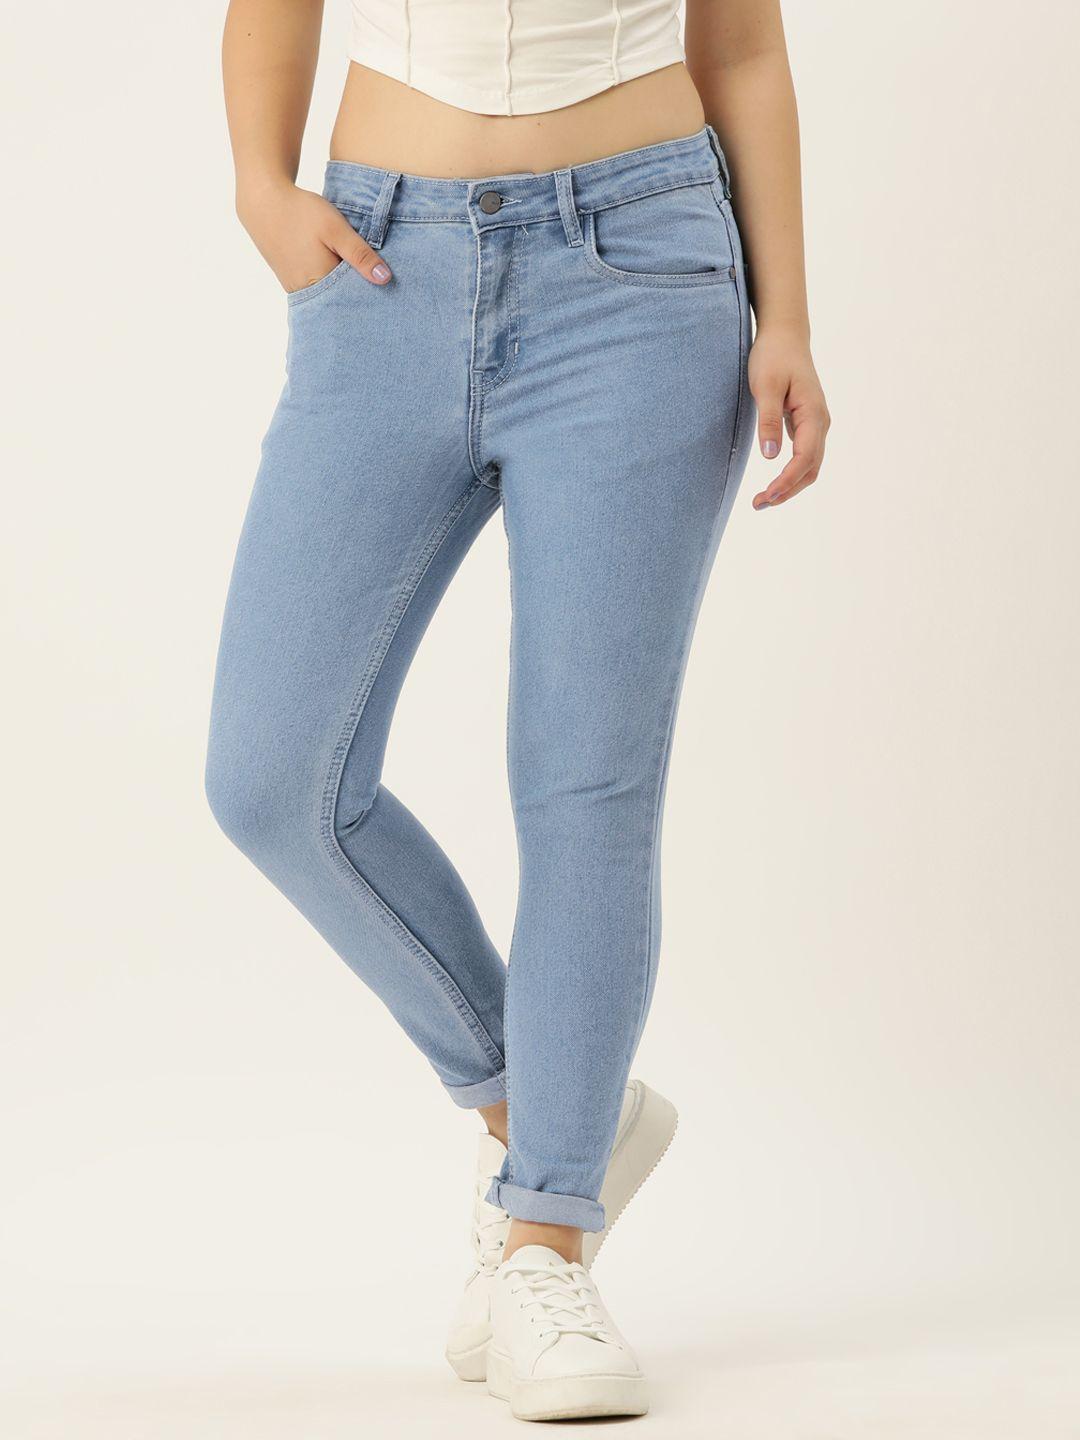 mast & harbour women skinny fit stretchable jeans